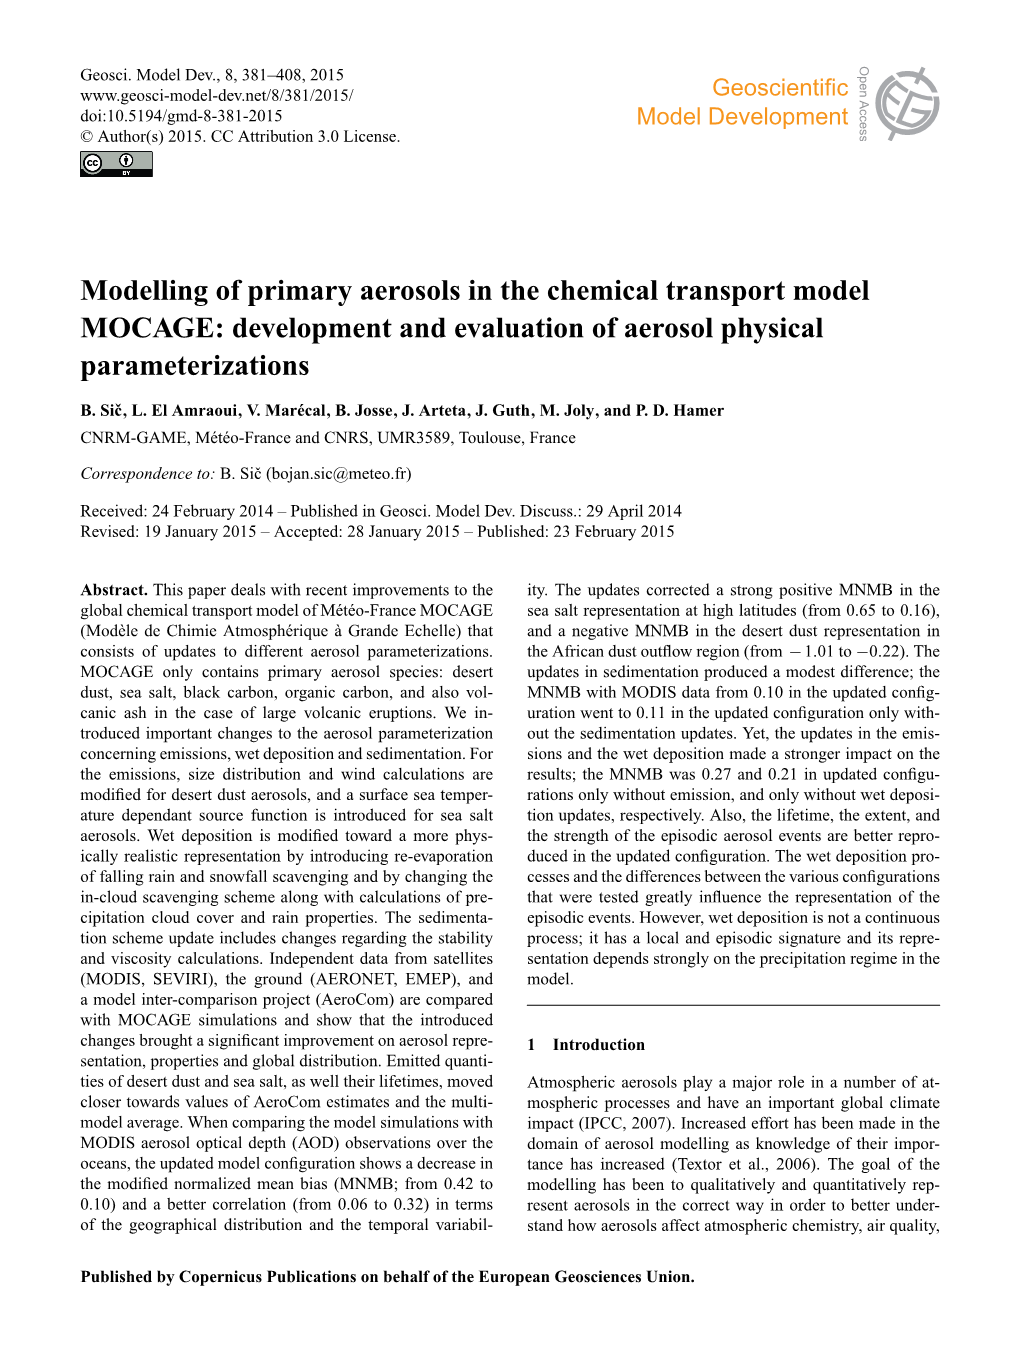 Modelling of Primary Aerosols in the Chemical Transport Model MOCAGE: Development and Evaluation of Aerosol Physical Parameterizations